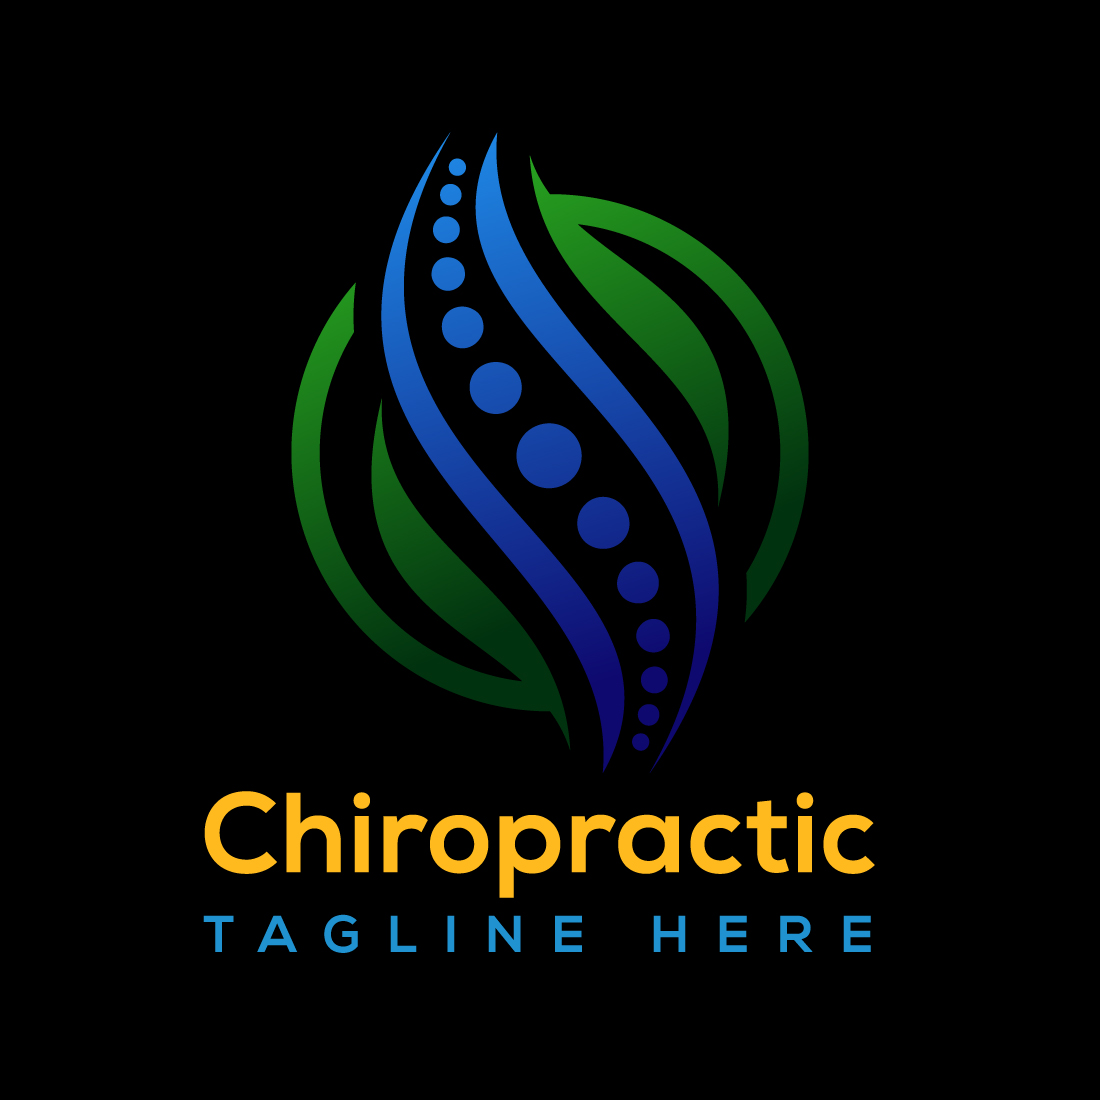 Chiropractic Logo Template cover image.